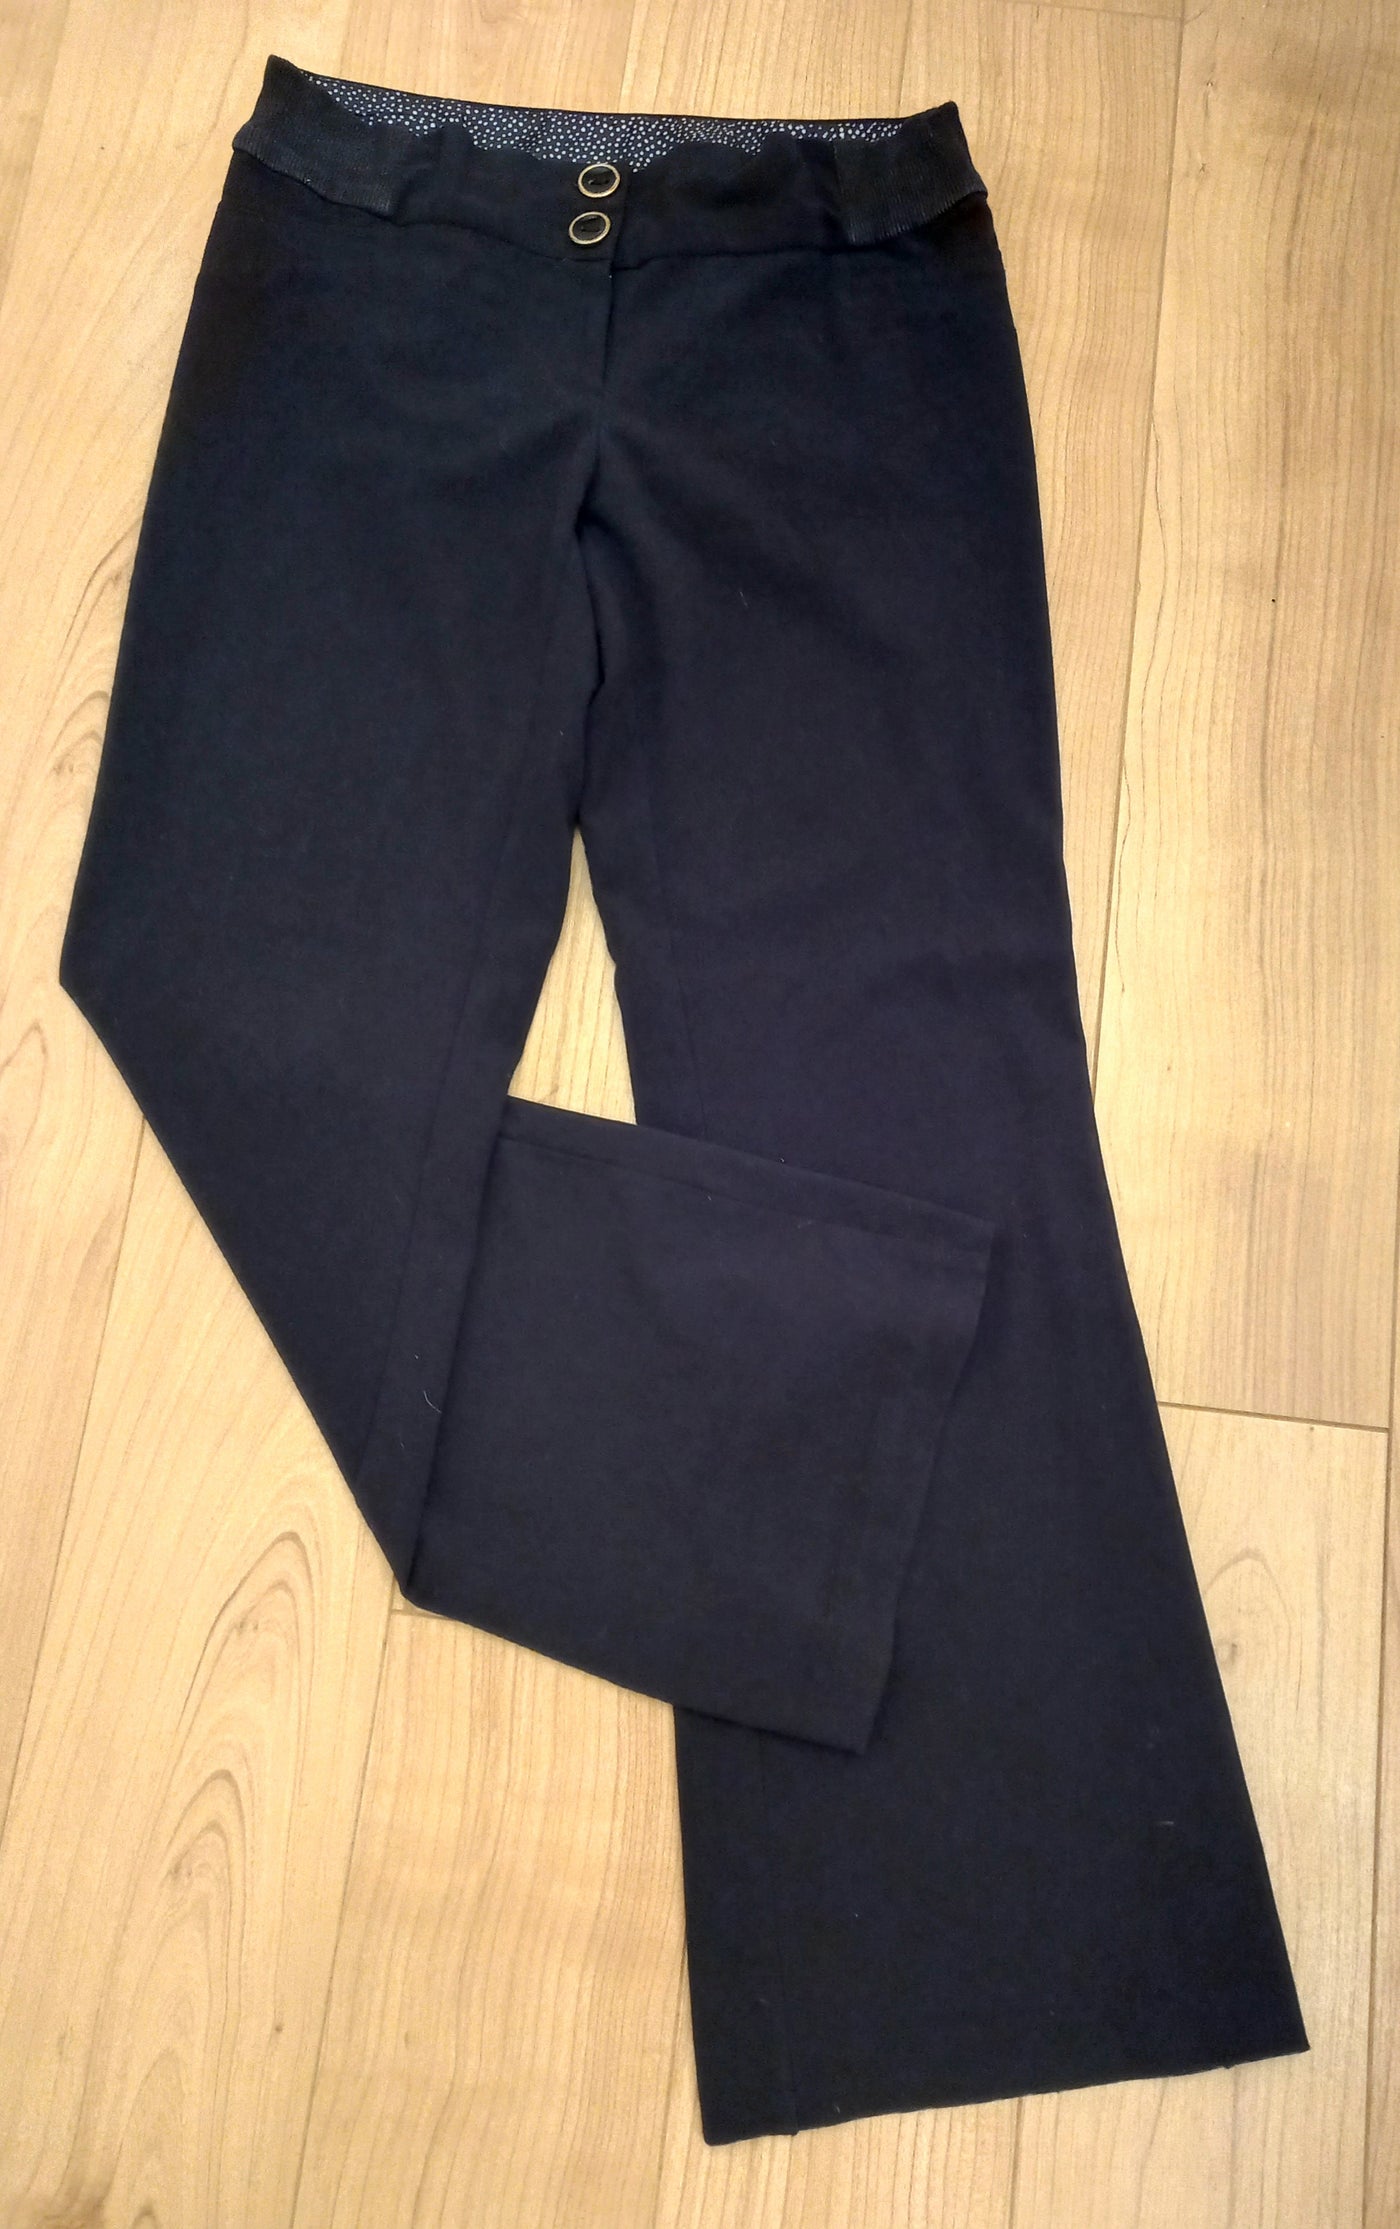 New Look Maternity Black Bootcut Trousers - Size 10